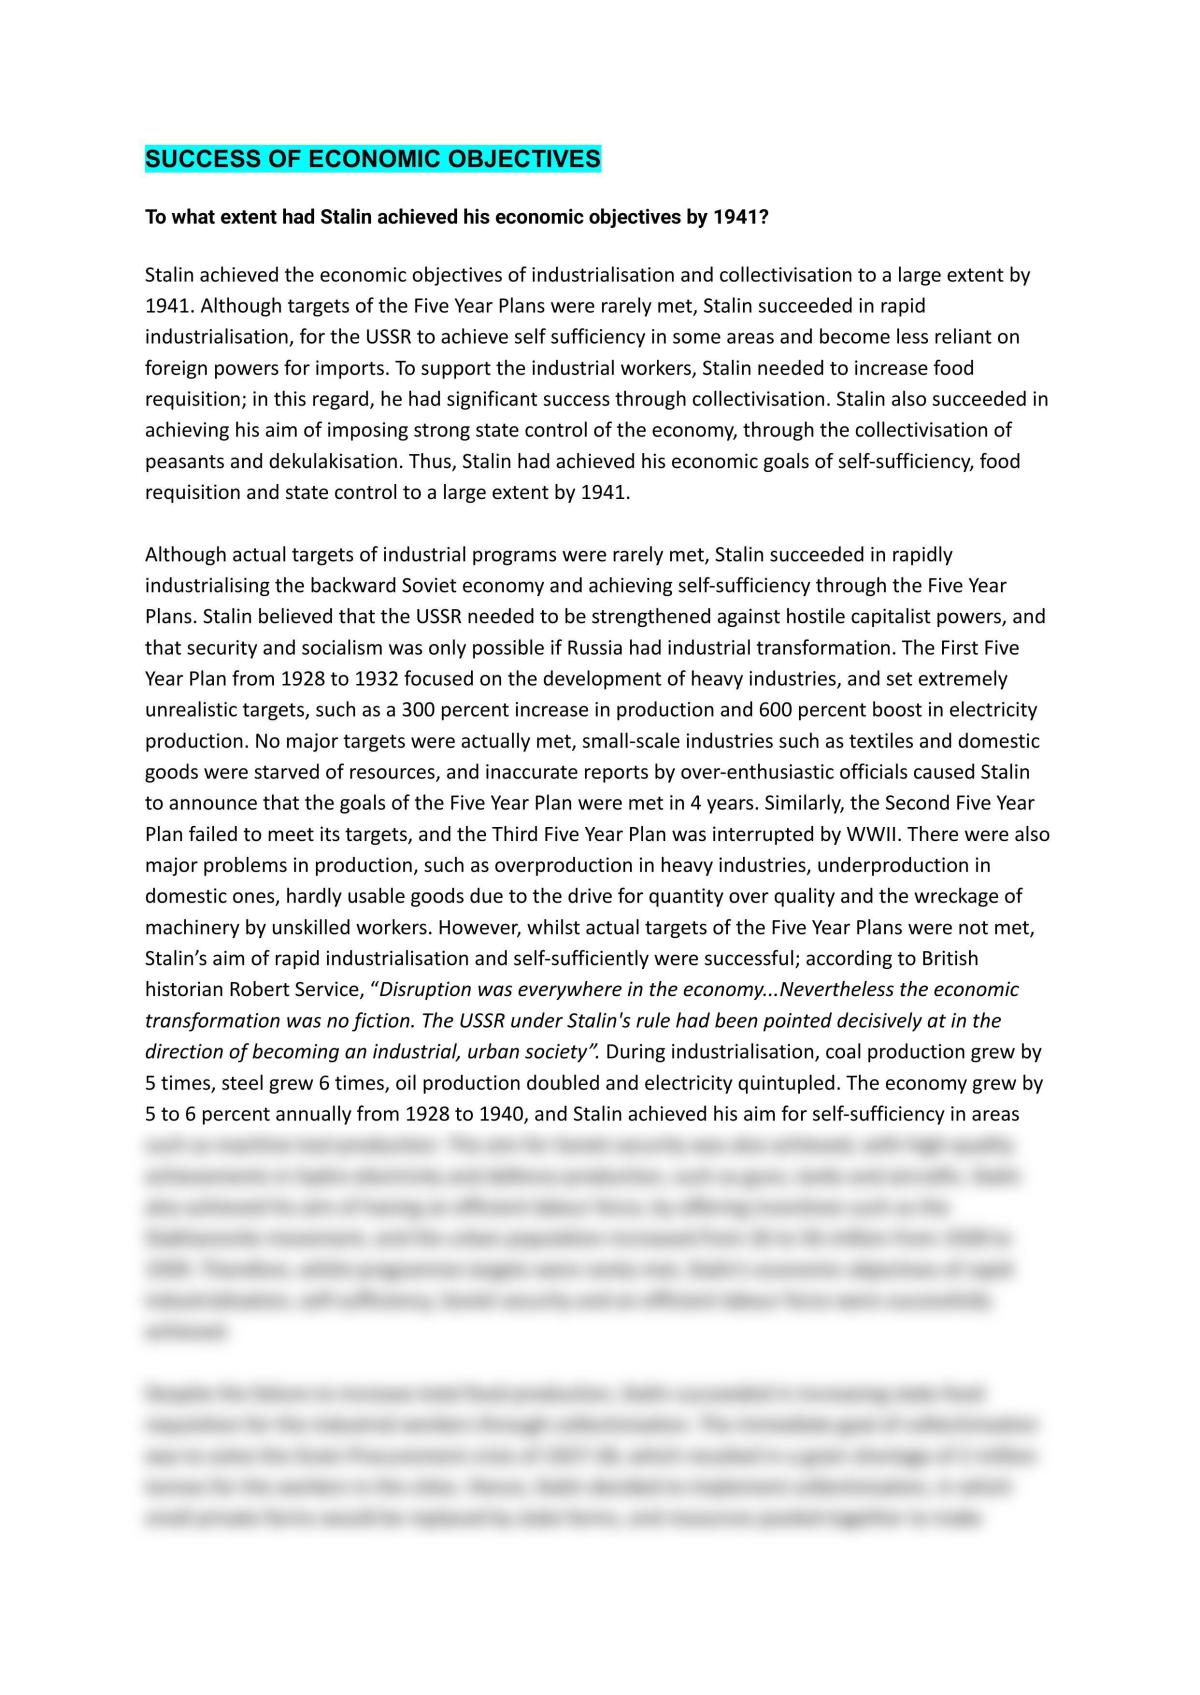 Success of Stalin's Economic Objectives Essay - Page 1